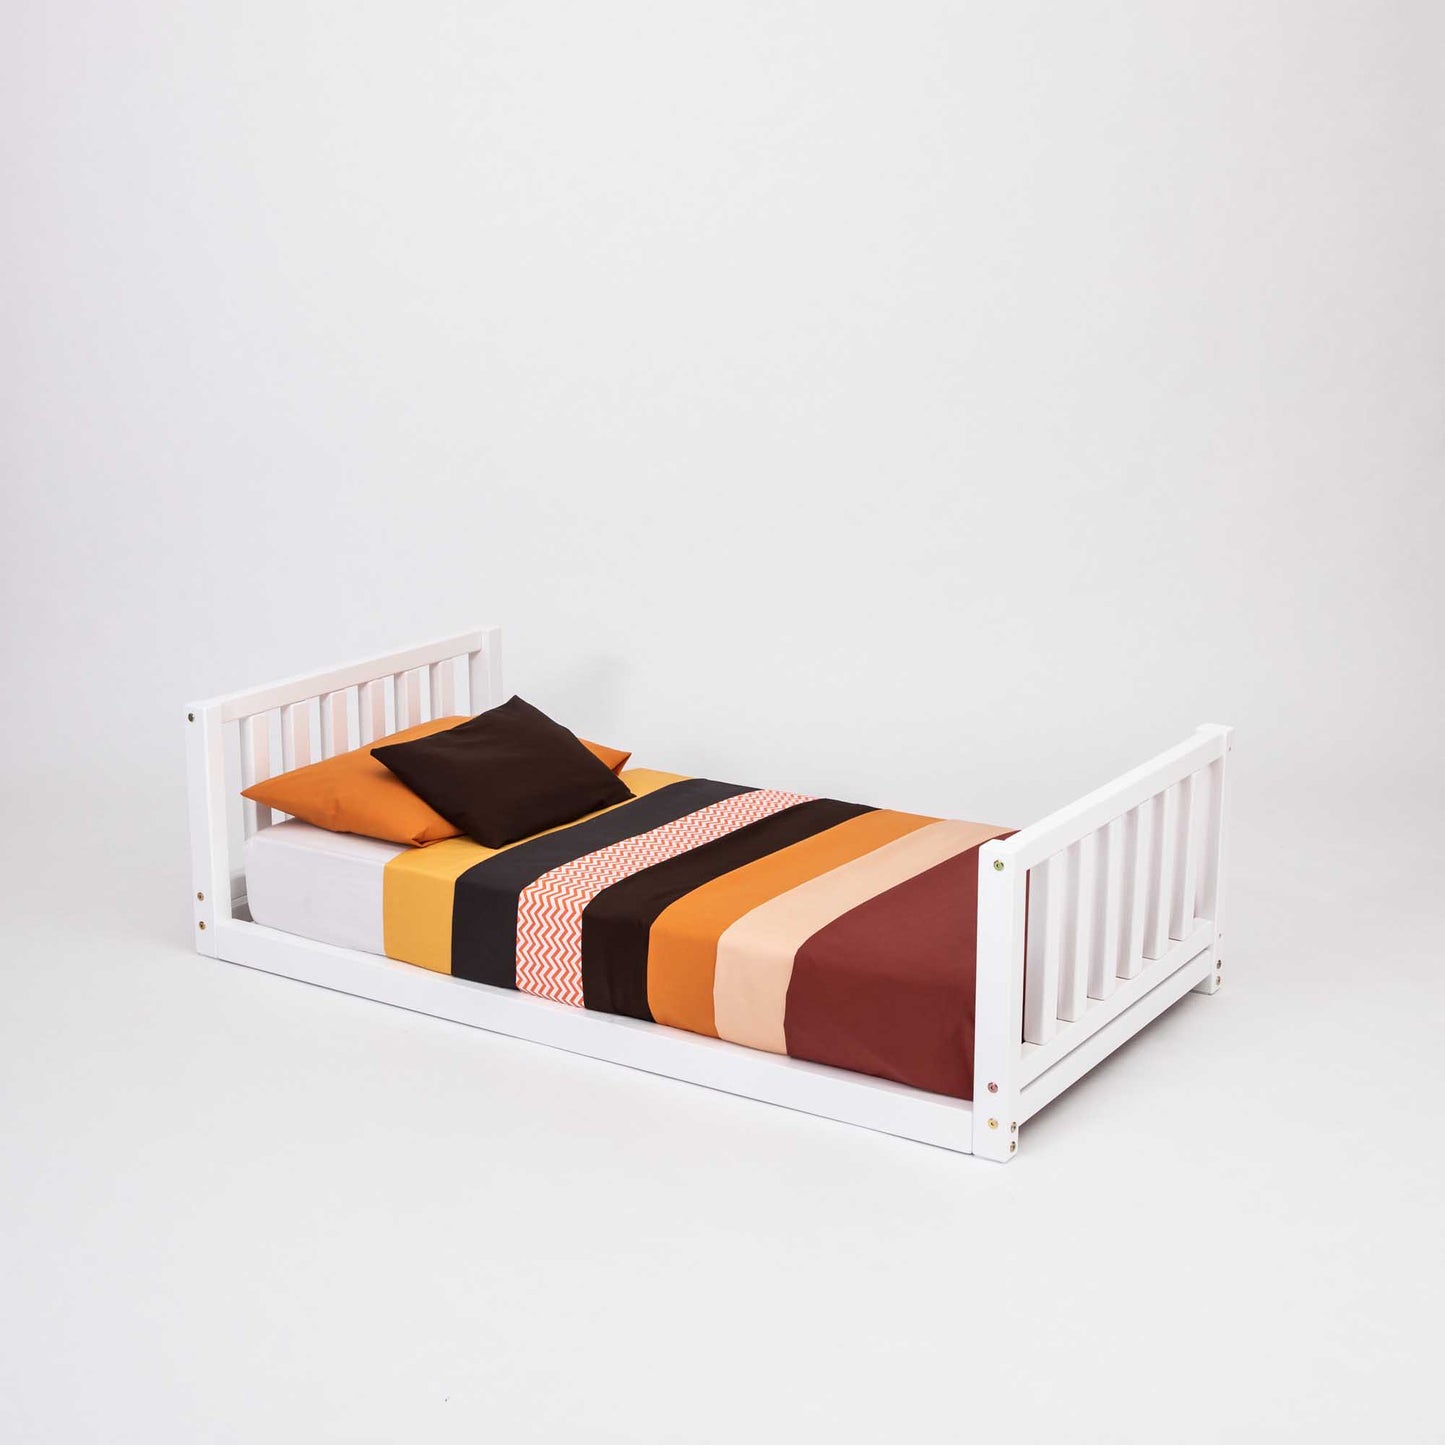 A 2-in-1 kid's bed on legs with a vertical rail headboard and footboard, adorned with striped sheets.